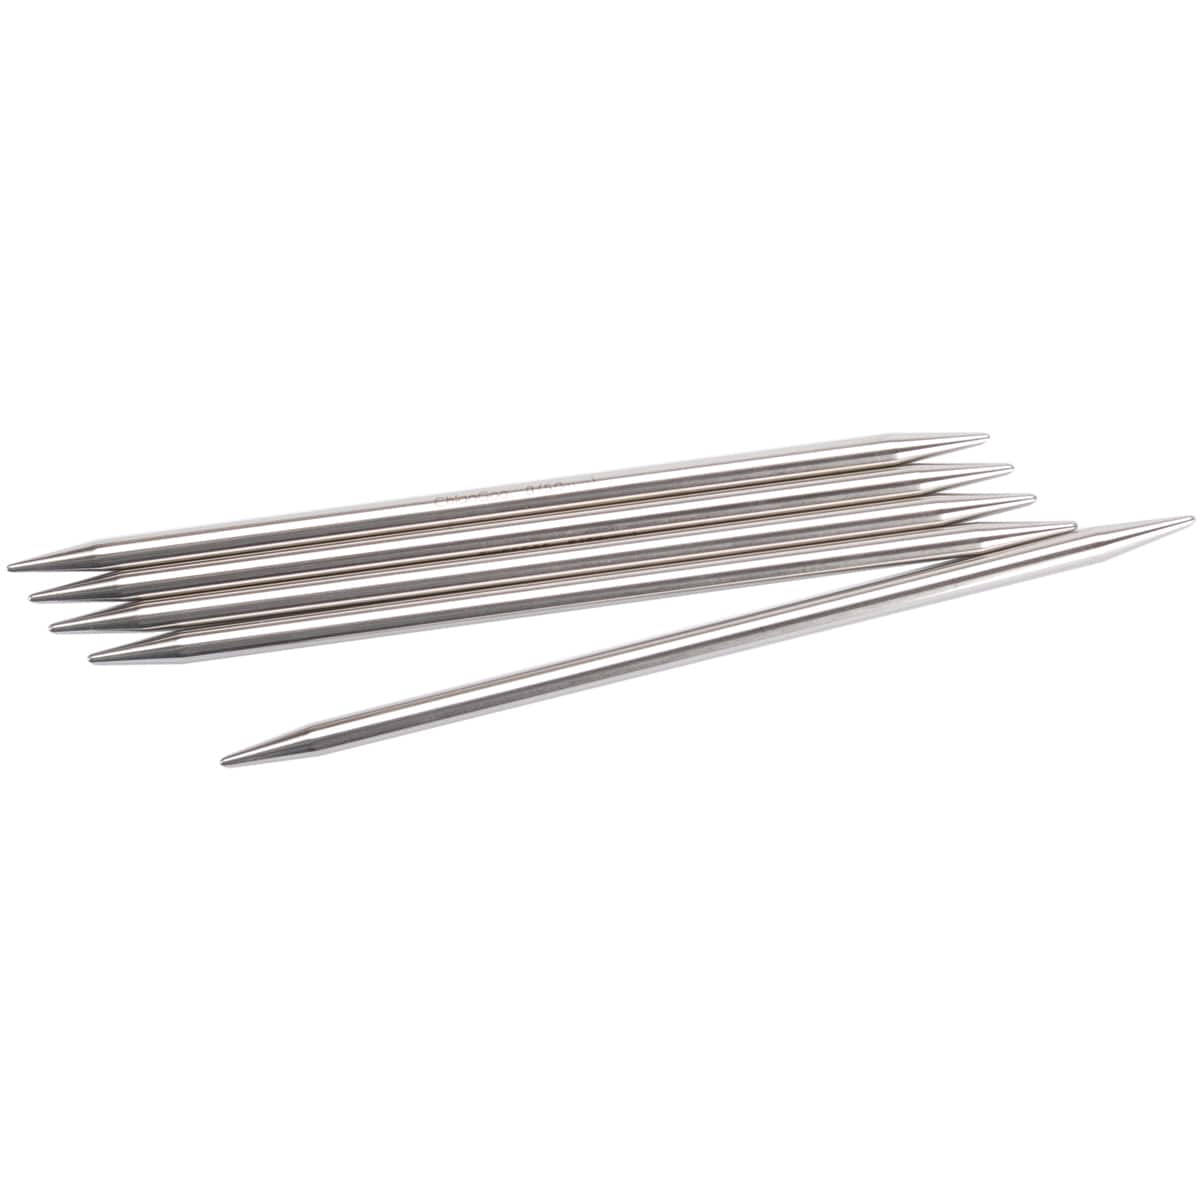 ChiaoGoo 8 inch Double Pointed Needles – Monarch Knitting